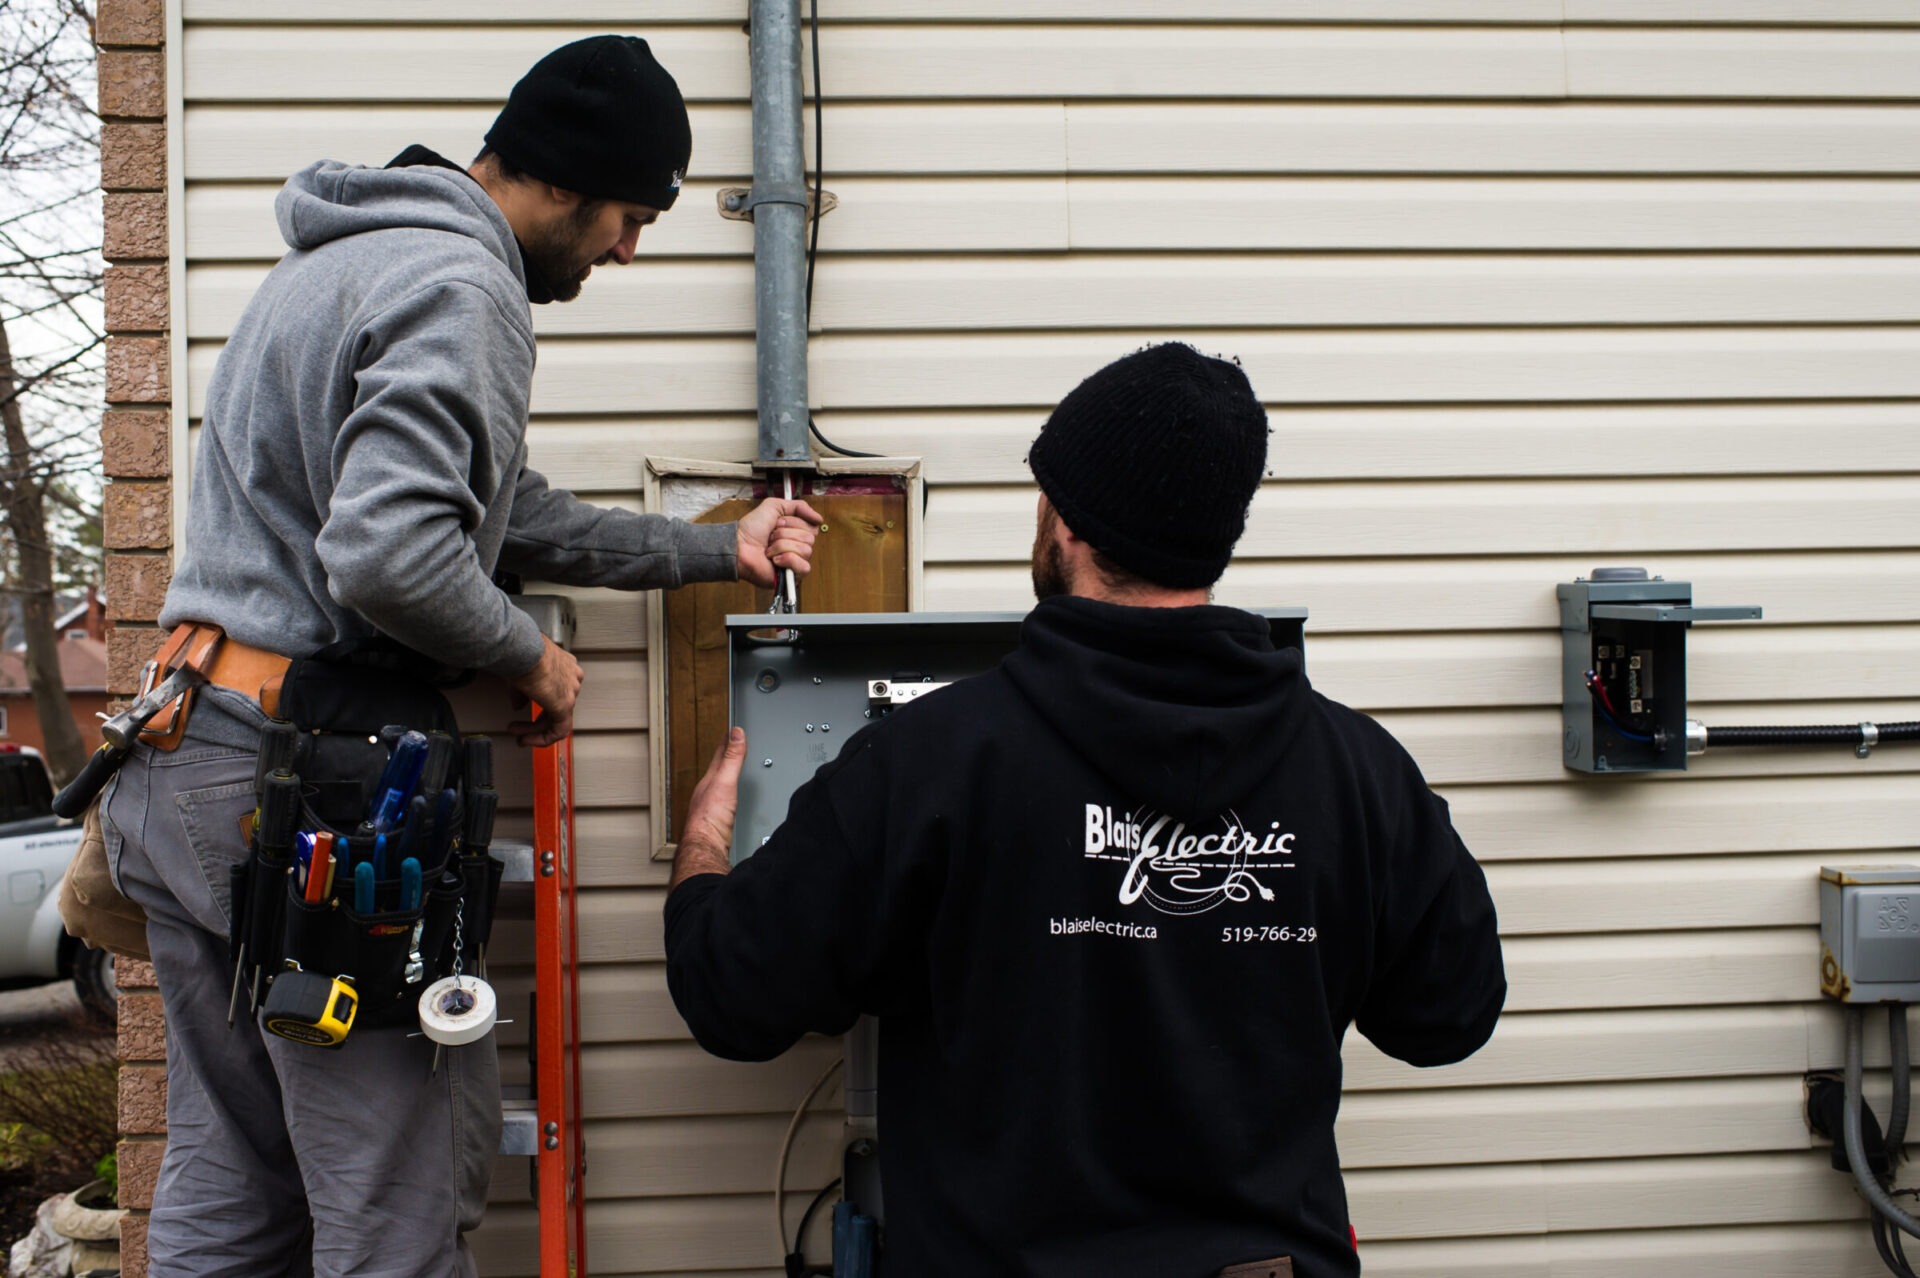 Two people are installing an electrical panel outdoors, one on a ladder. They are focused on their task, wearing casual clothes and utility belts.